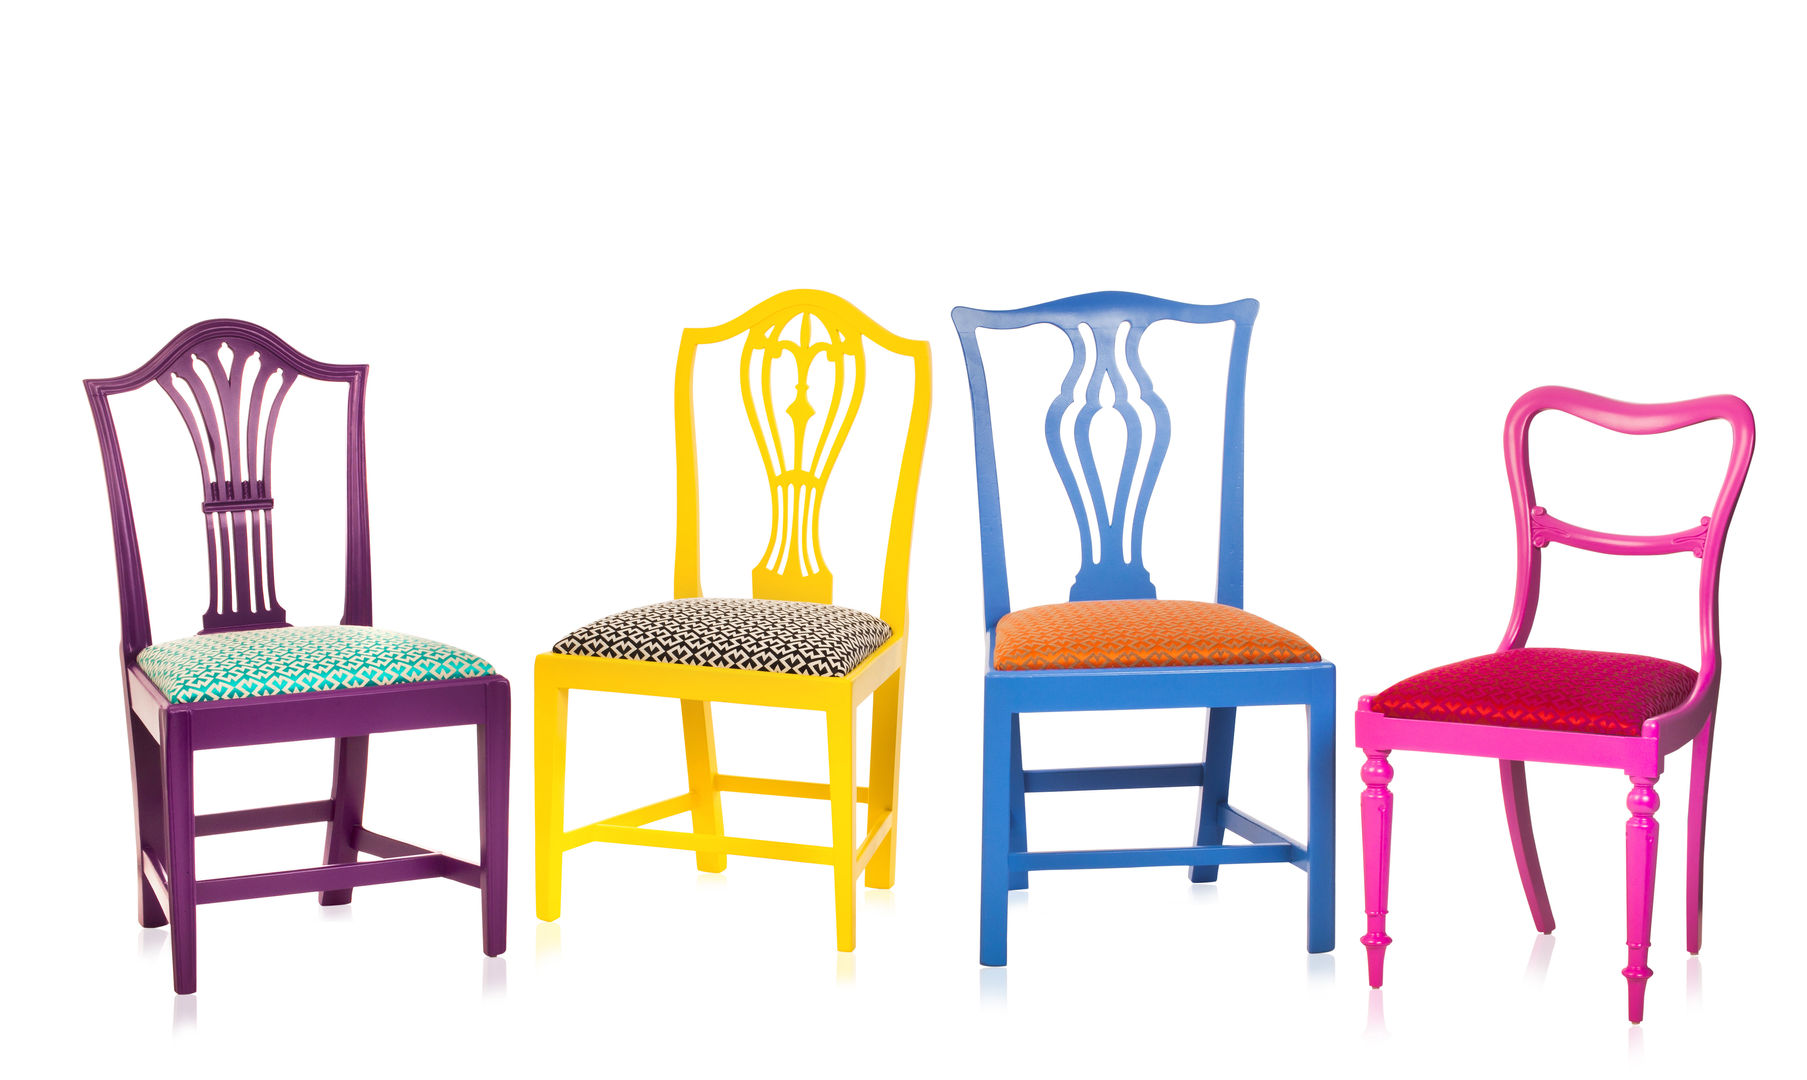 Klash Chairs Standrin Eclectic style dining room Solid Wood Multicolored dining chairs,dining chair,dining room chairs,dining room,Chairs & benches